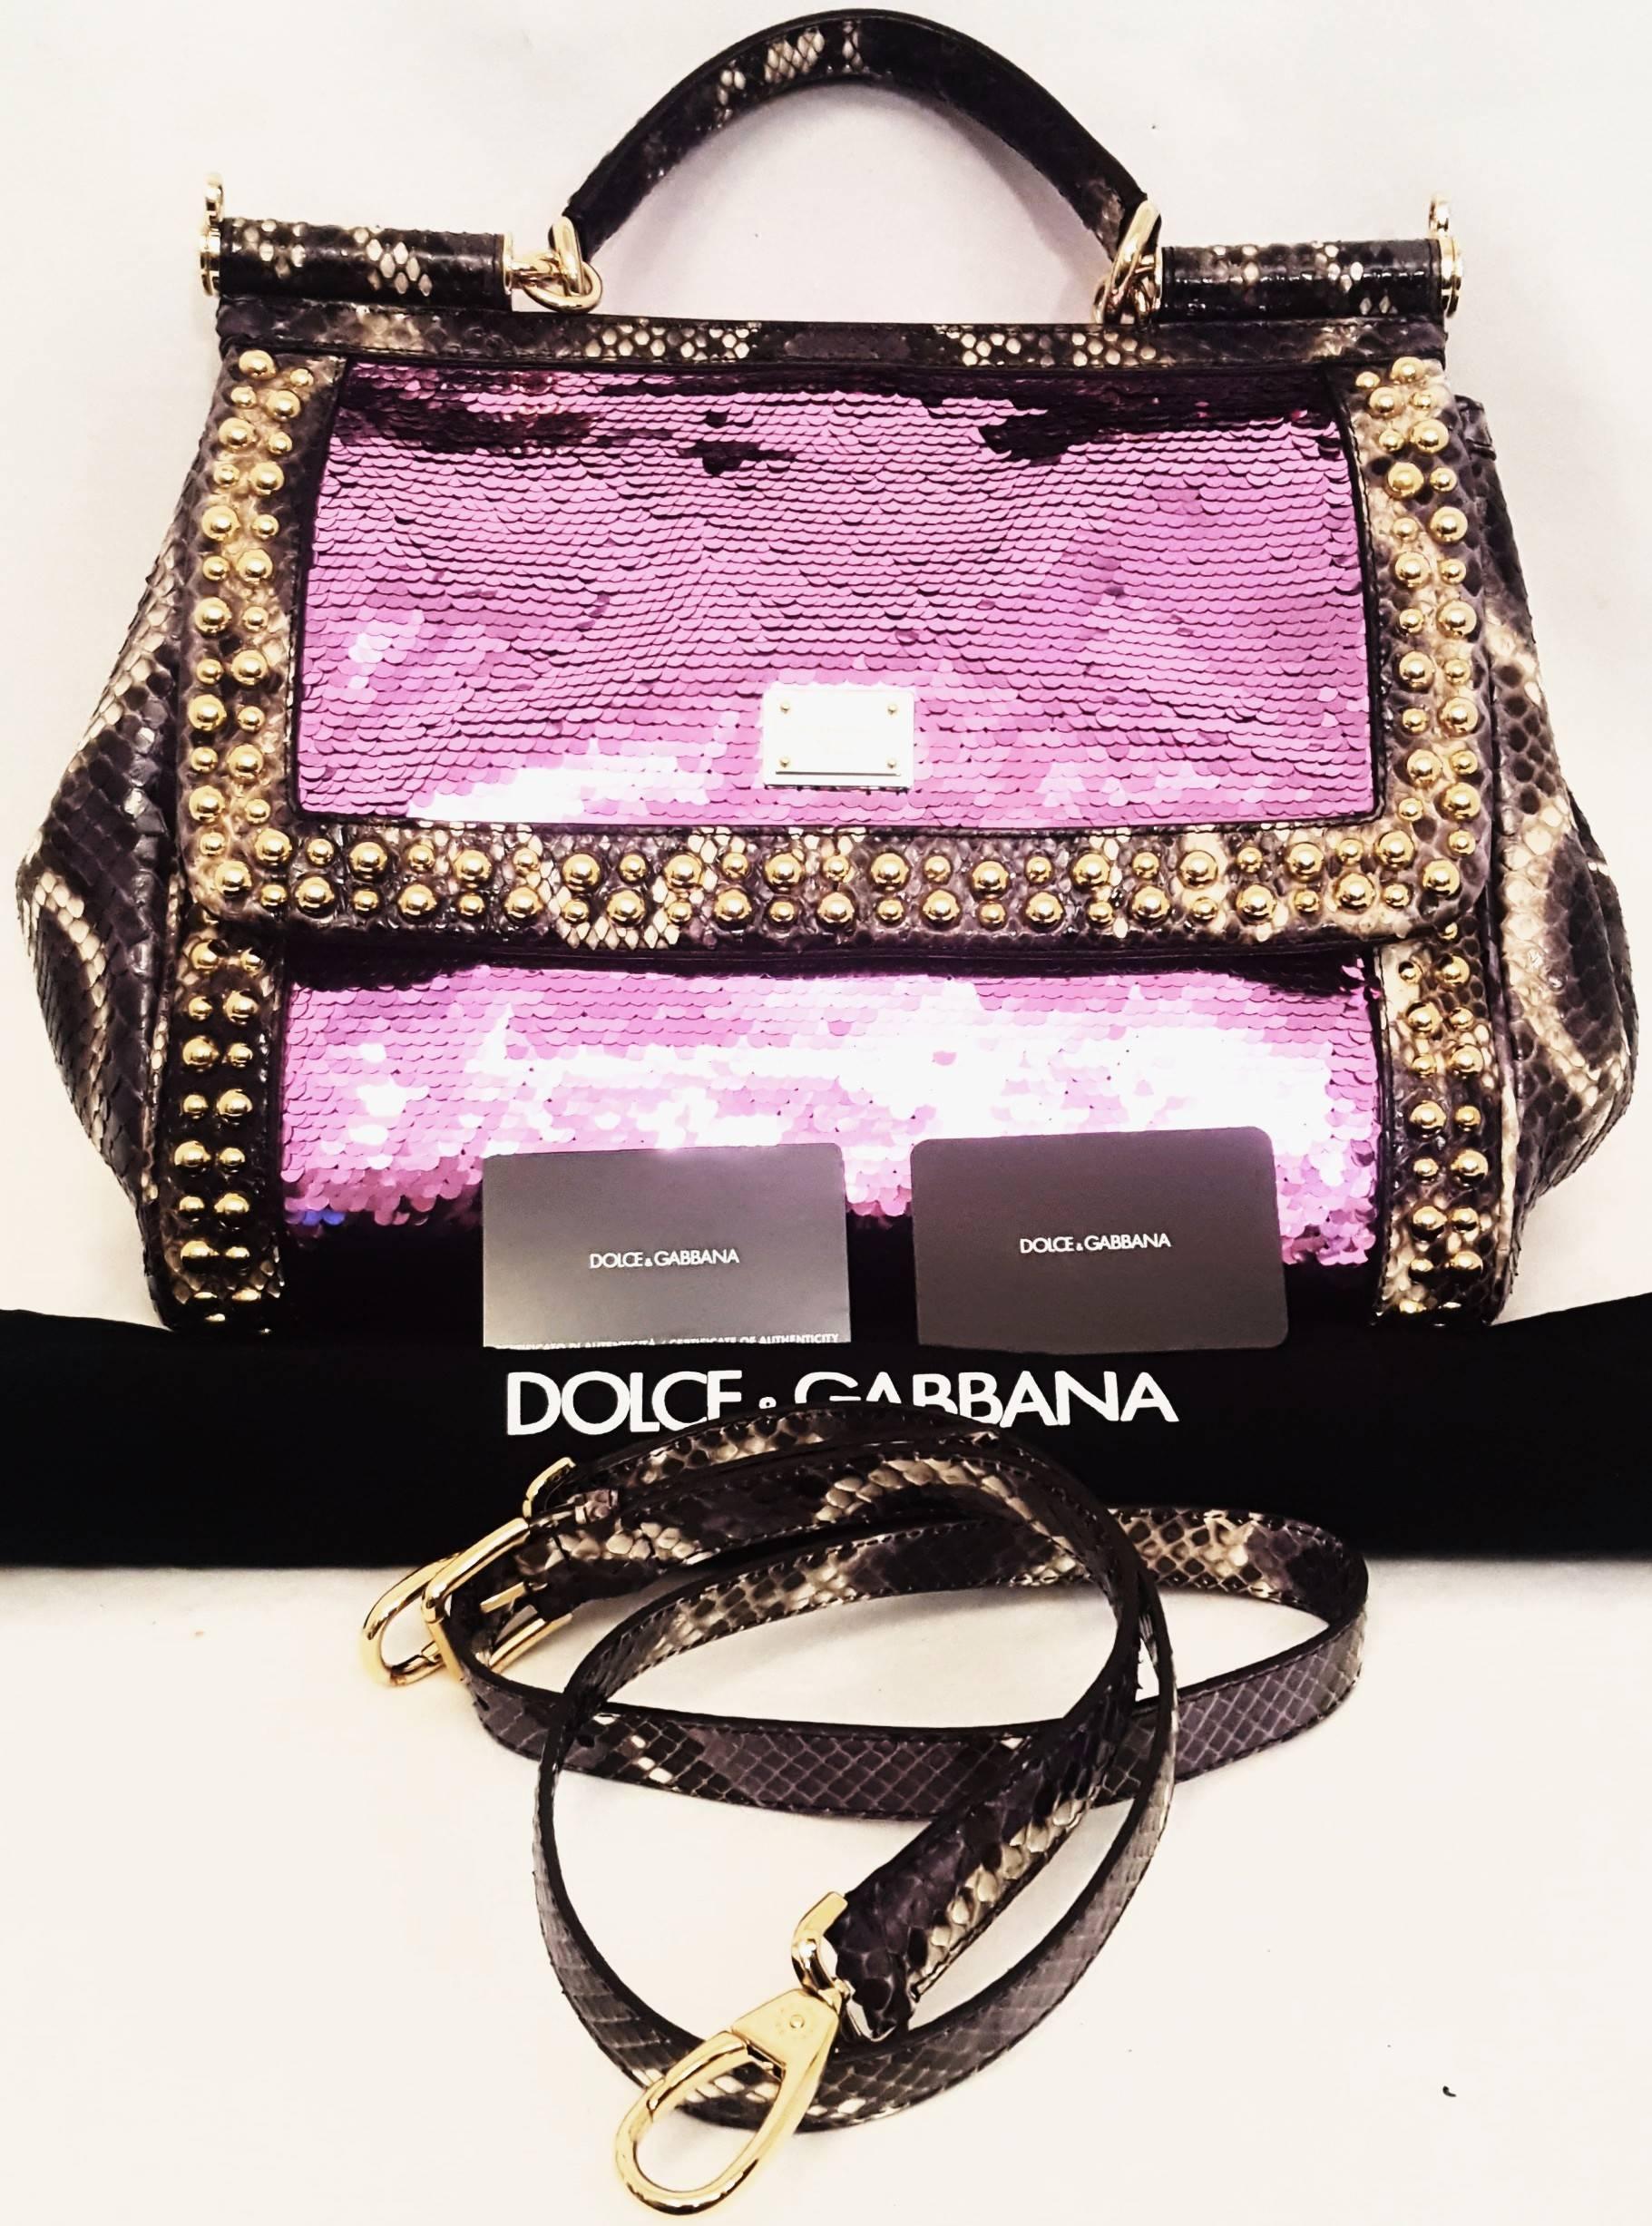 Dolce & Gabbana flashy Miss Sicily bag features purple, brown and ivory python trimmed on side panels and on the top handle. This Miss Sicily bag with gold-tone hardware including the gold tone studs around the flap and trim around the pink sequined